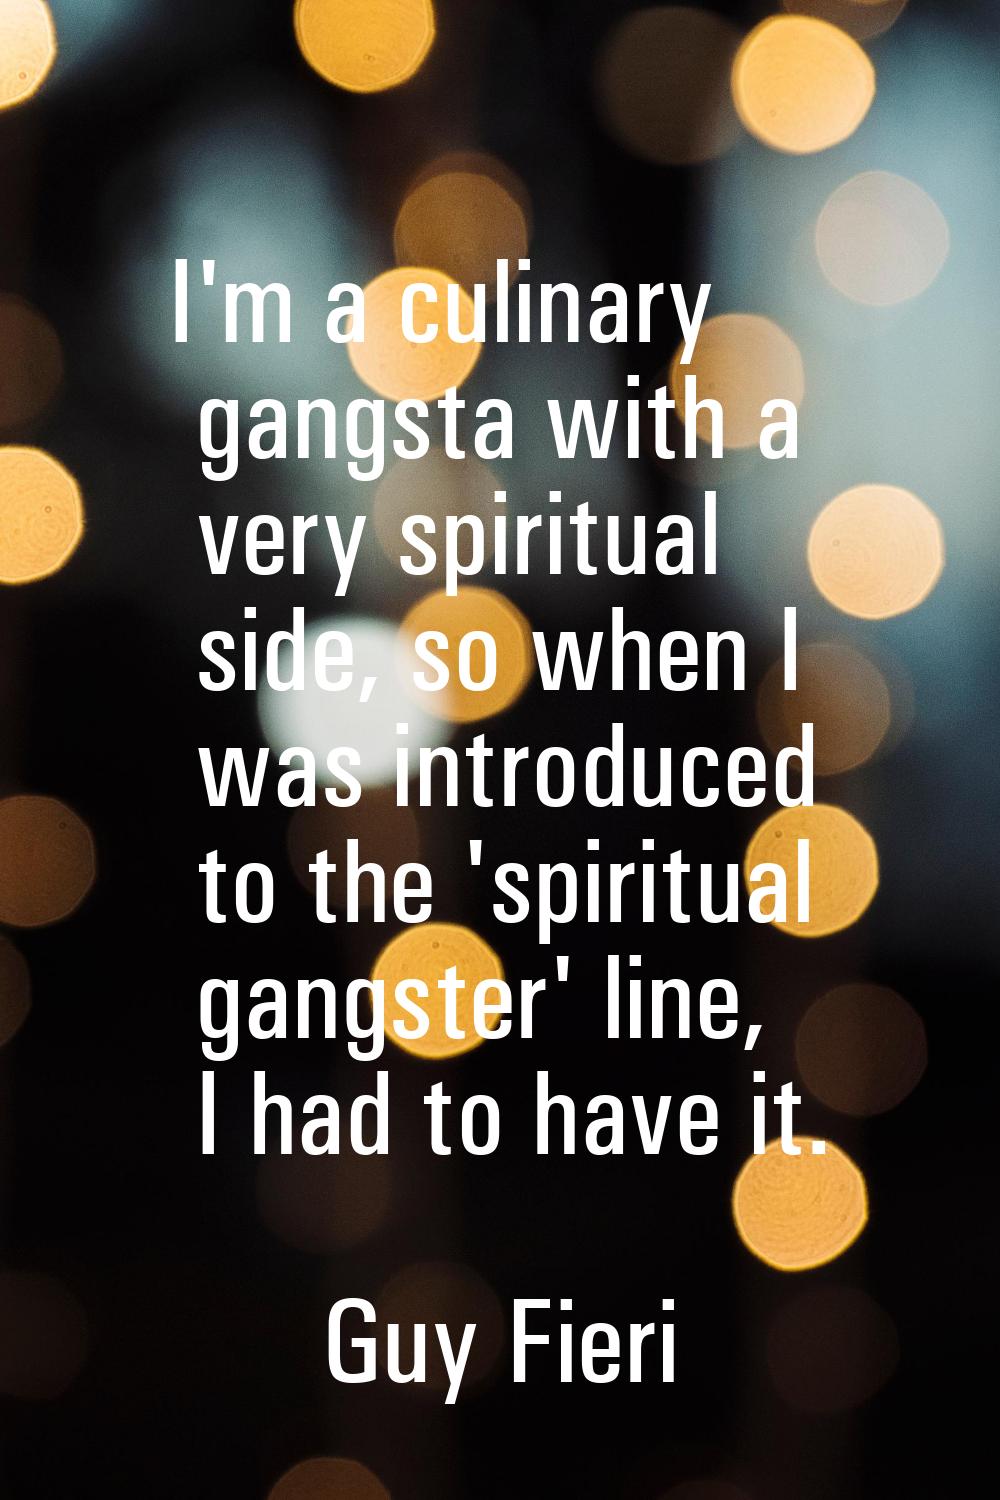 I'm a culinary gangsta with a very spiritual side, so when I was introduced to the 'spiritual gangs